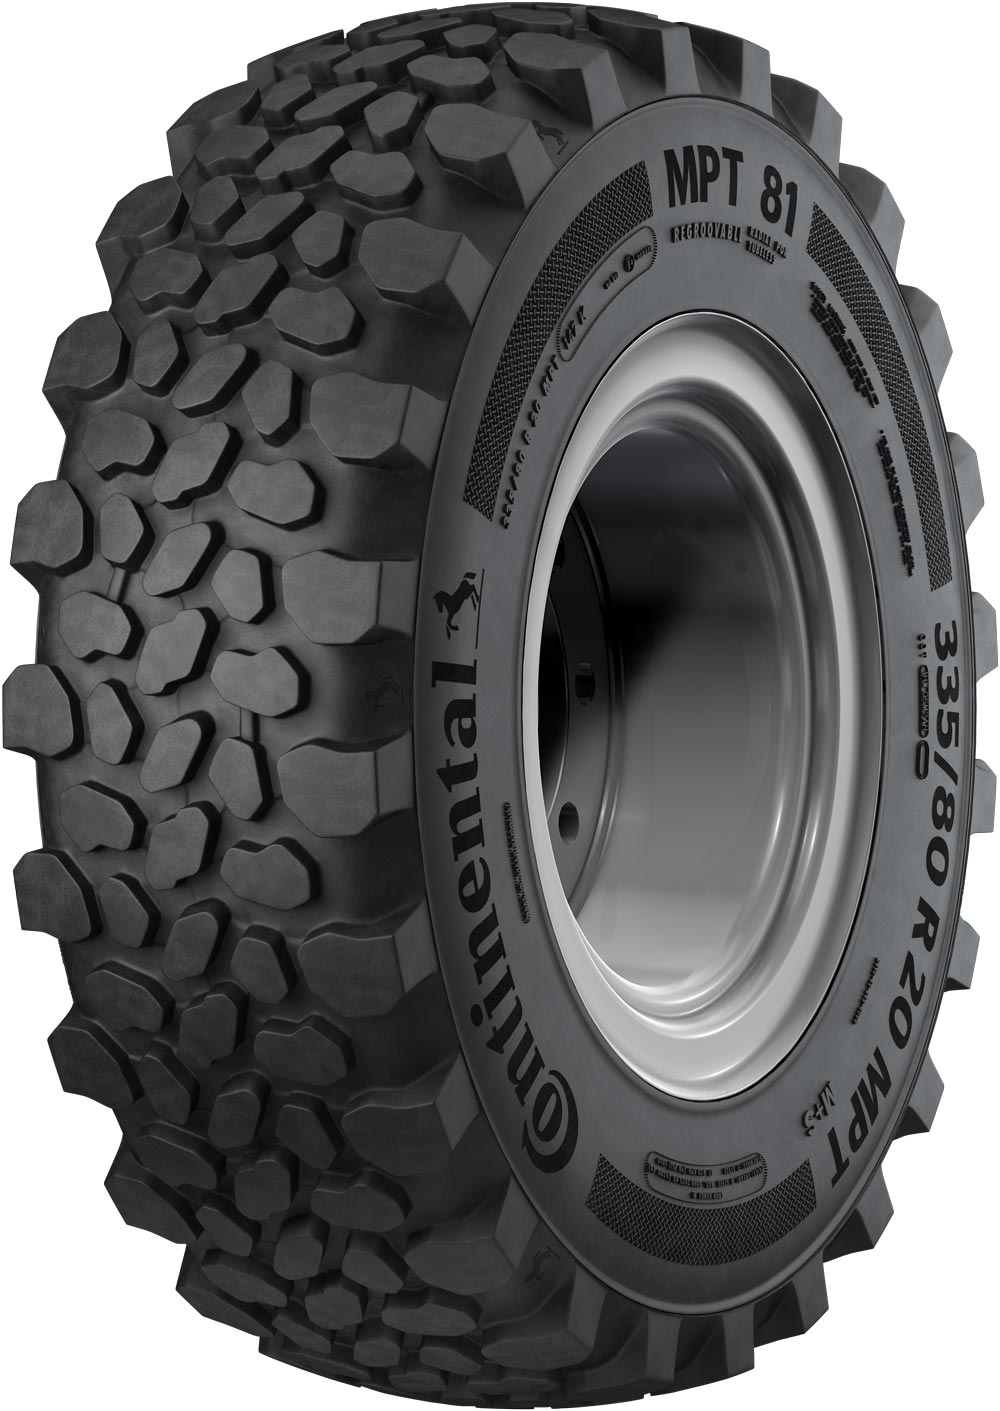 product_type-industrial_tires CONTINENTAL MPT81 TL 335/80 R20 147K